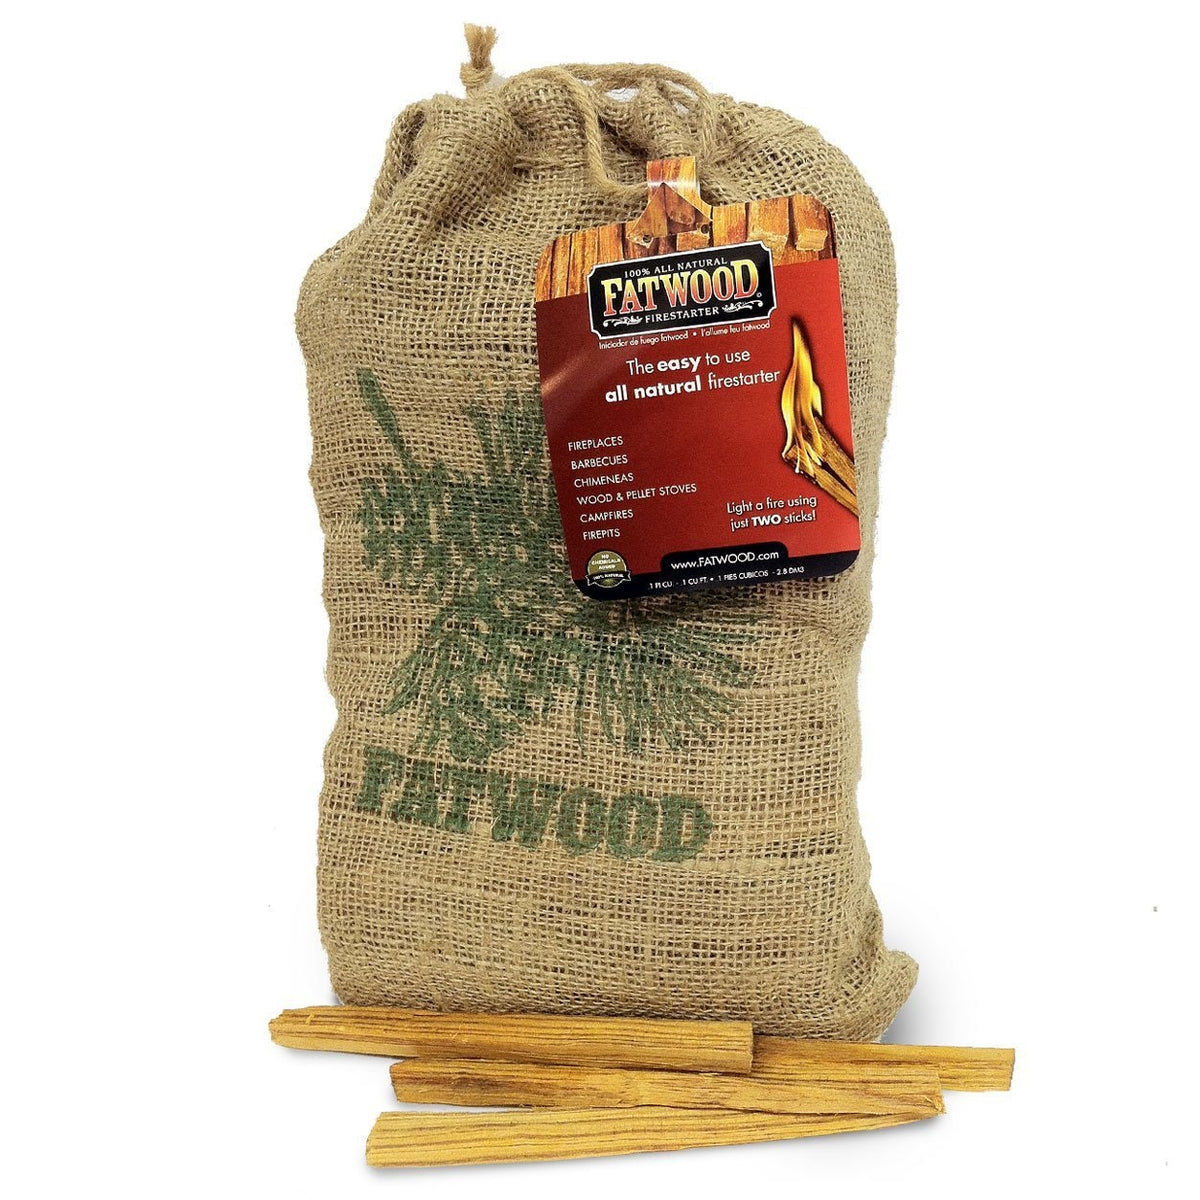 buy firelogs & fire starters at cheap rate in bulk. wholesale & retail fireplace maintenance tools store.